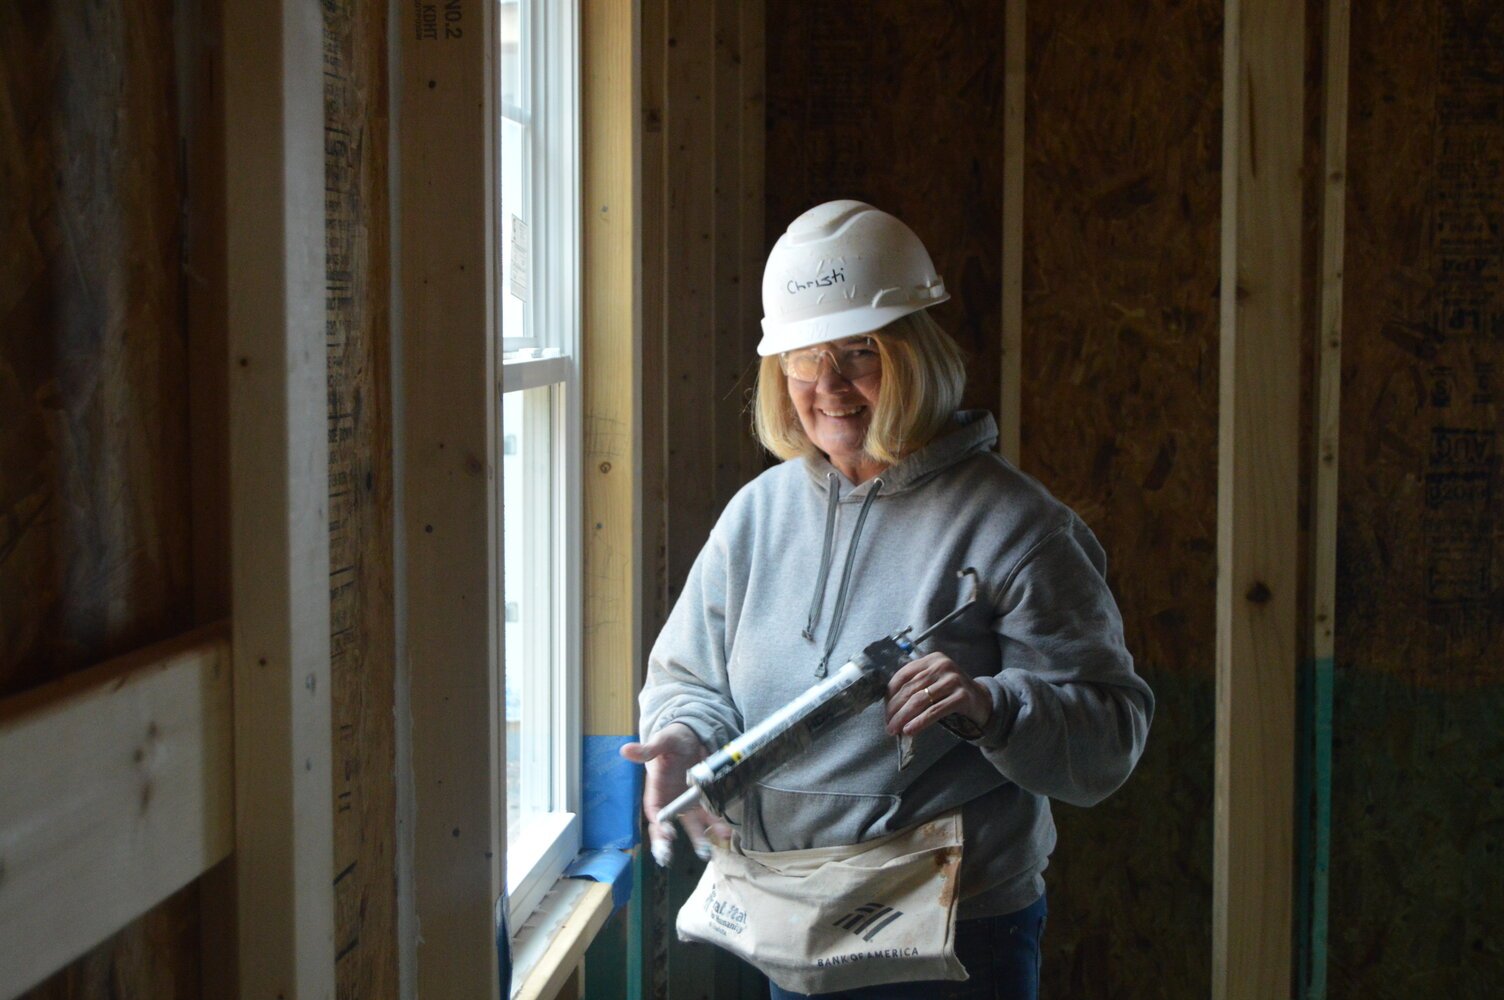 Filters Fast employee smiles while caulking window